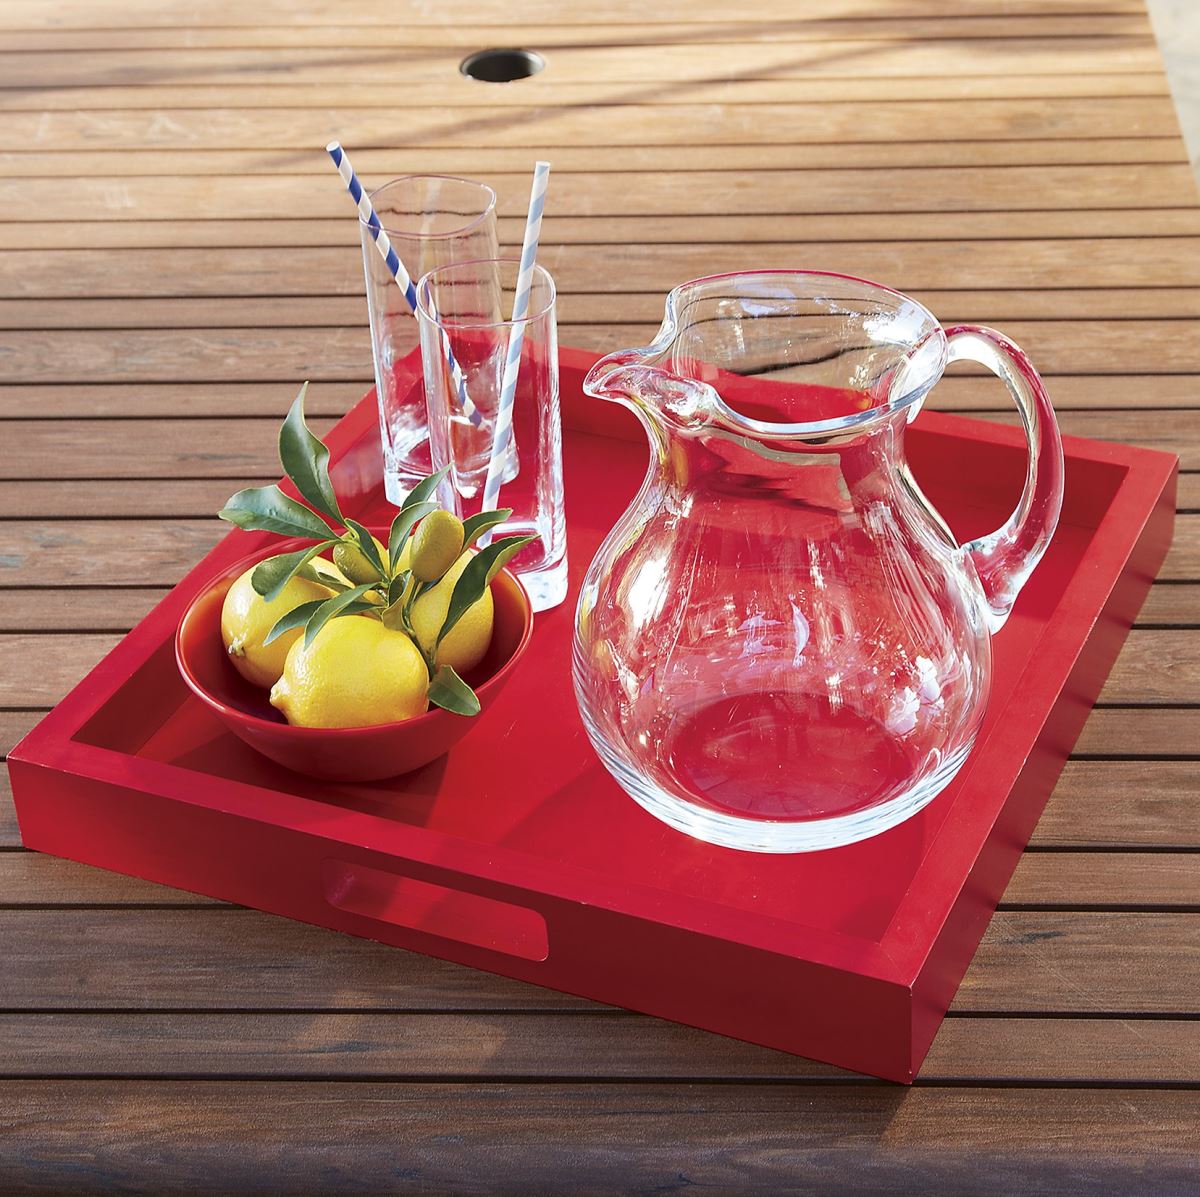 Wooden serving tray from Crate & Barrel